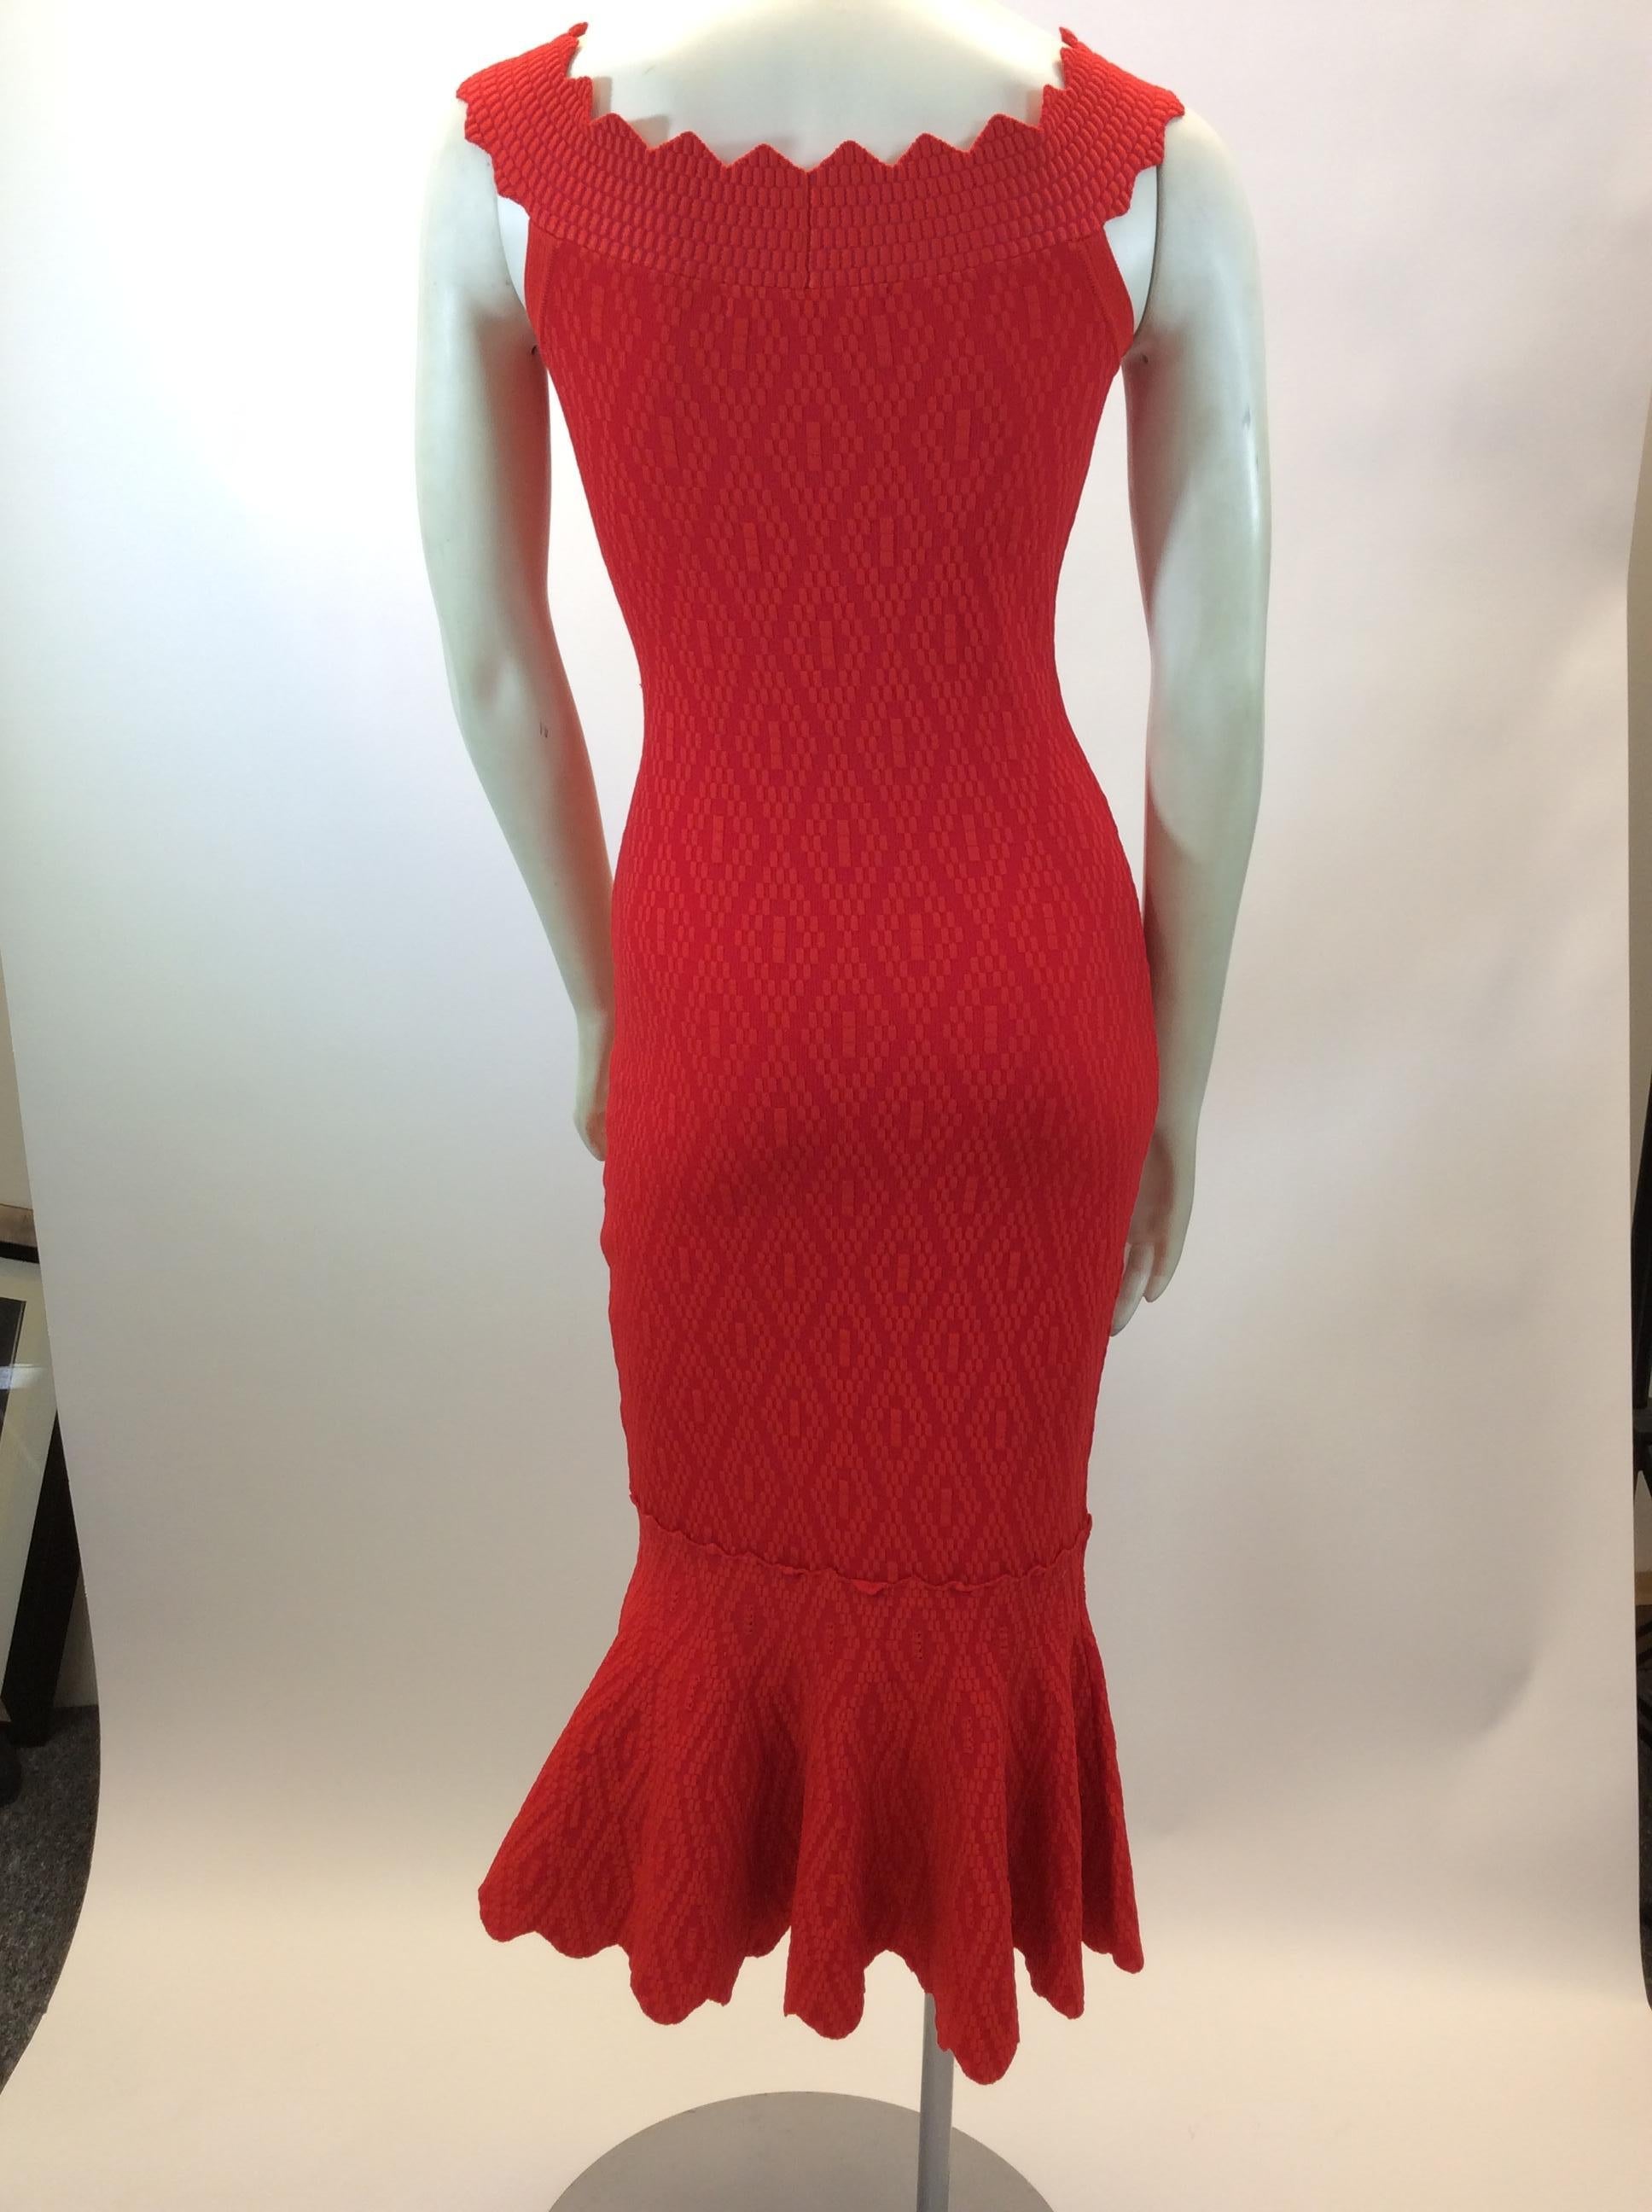 Jonathan Simkhai Red Knit Dress In Good Condition For Sale In Narberth, PA